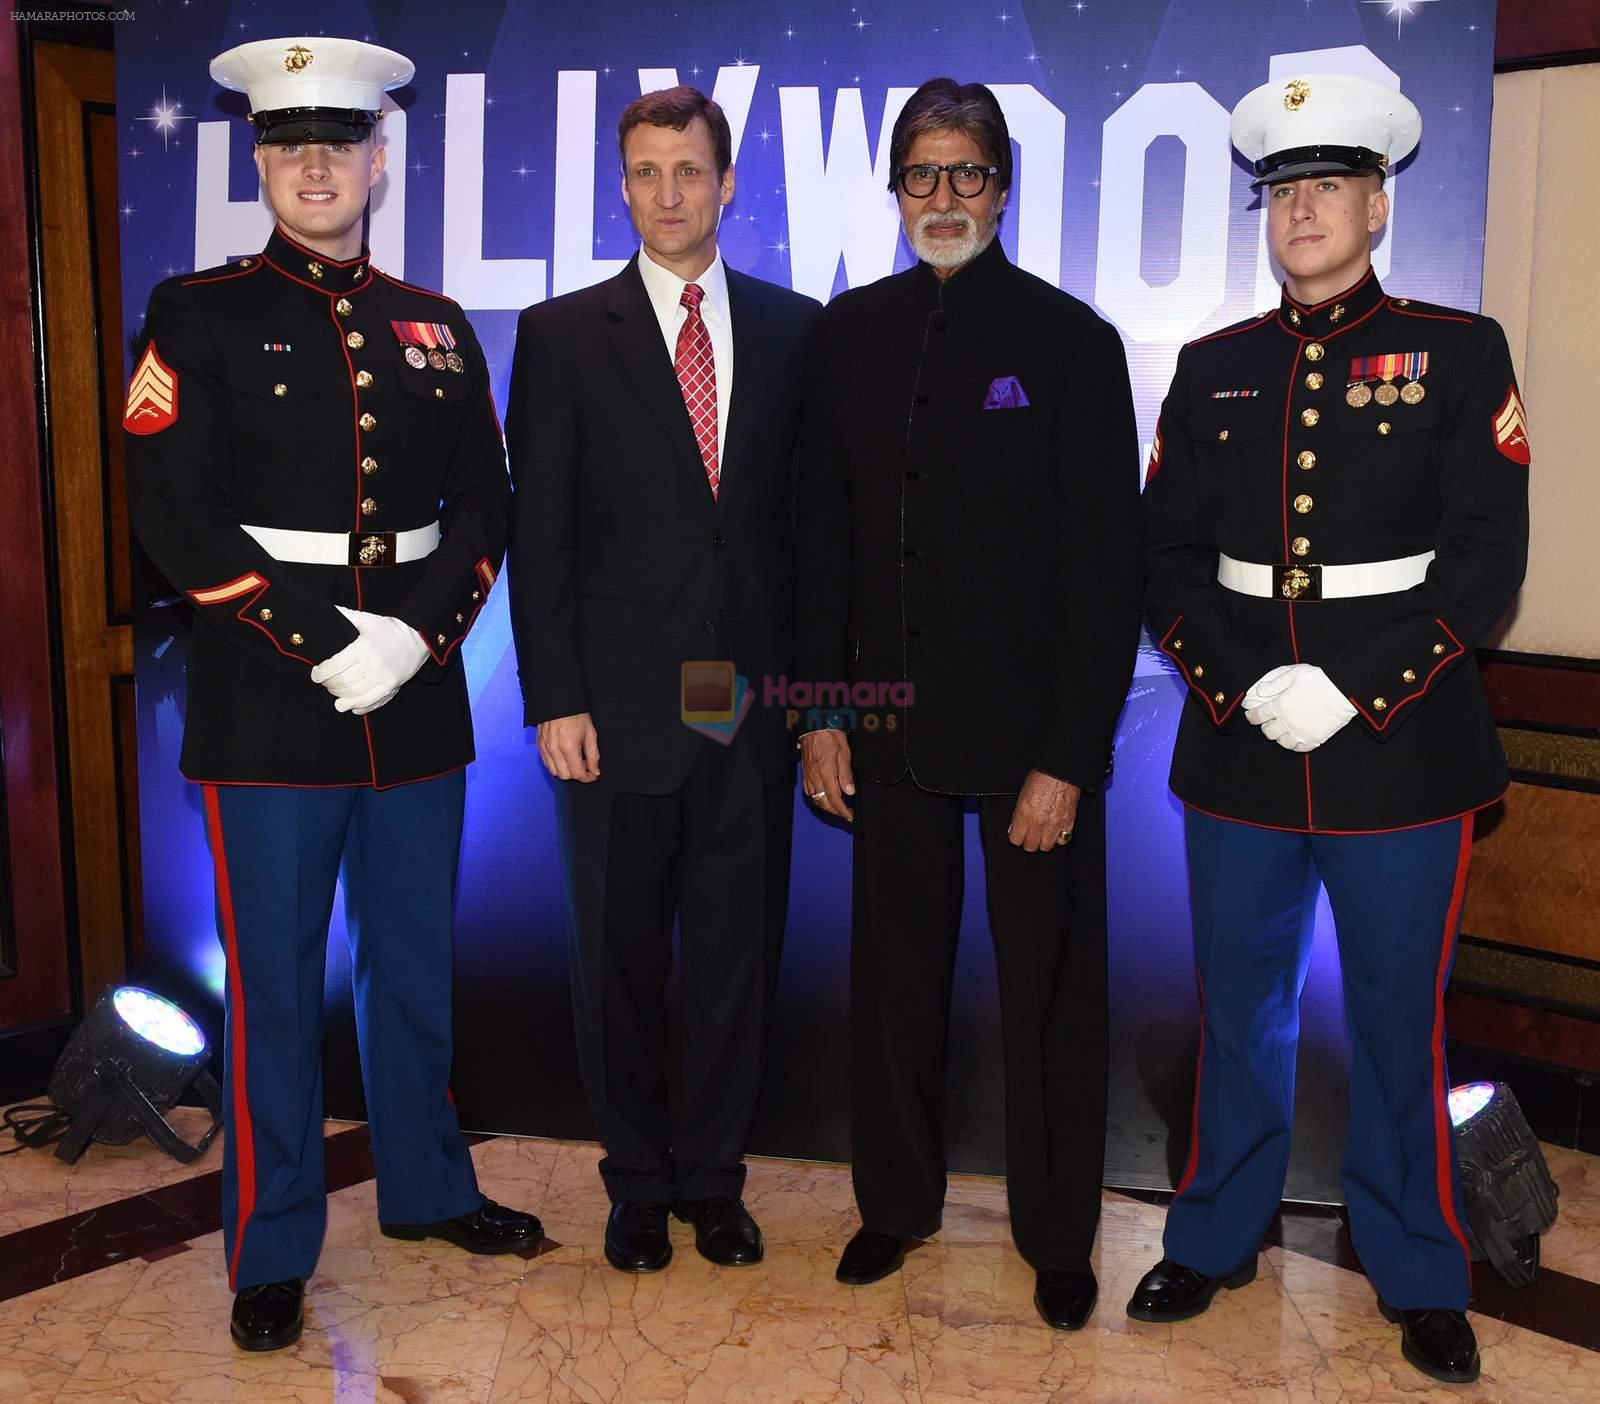 Amitabh Bachchan at the 239th anniversary of US Independence on 2nd July 2015